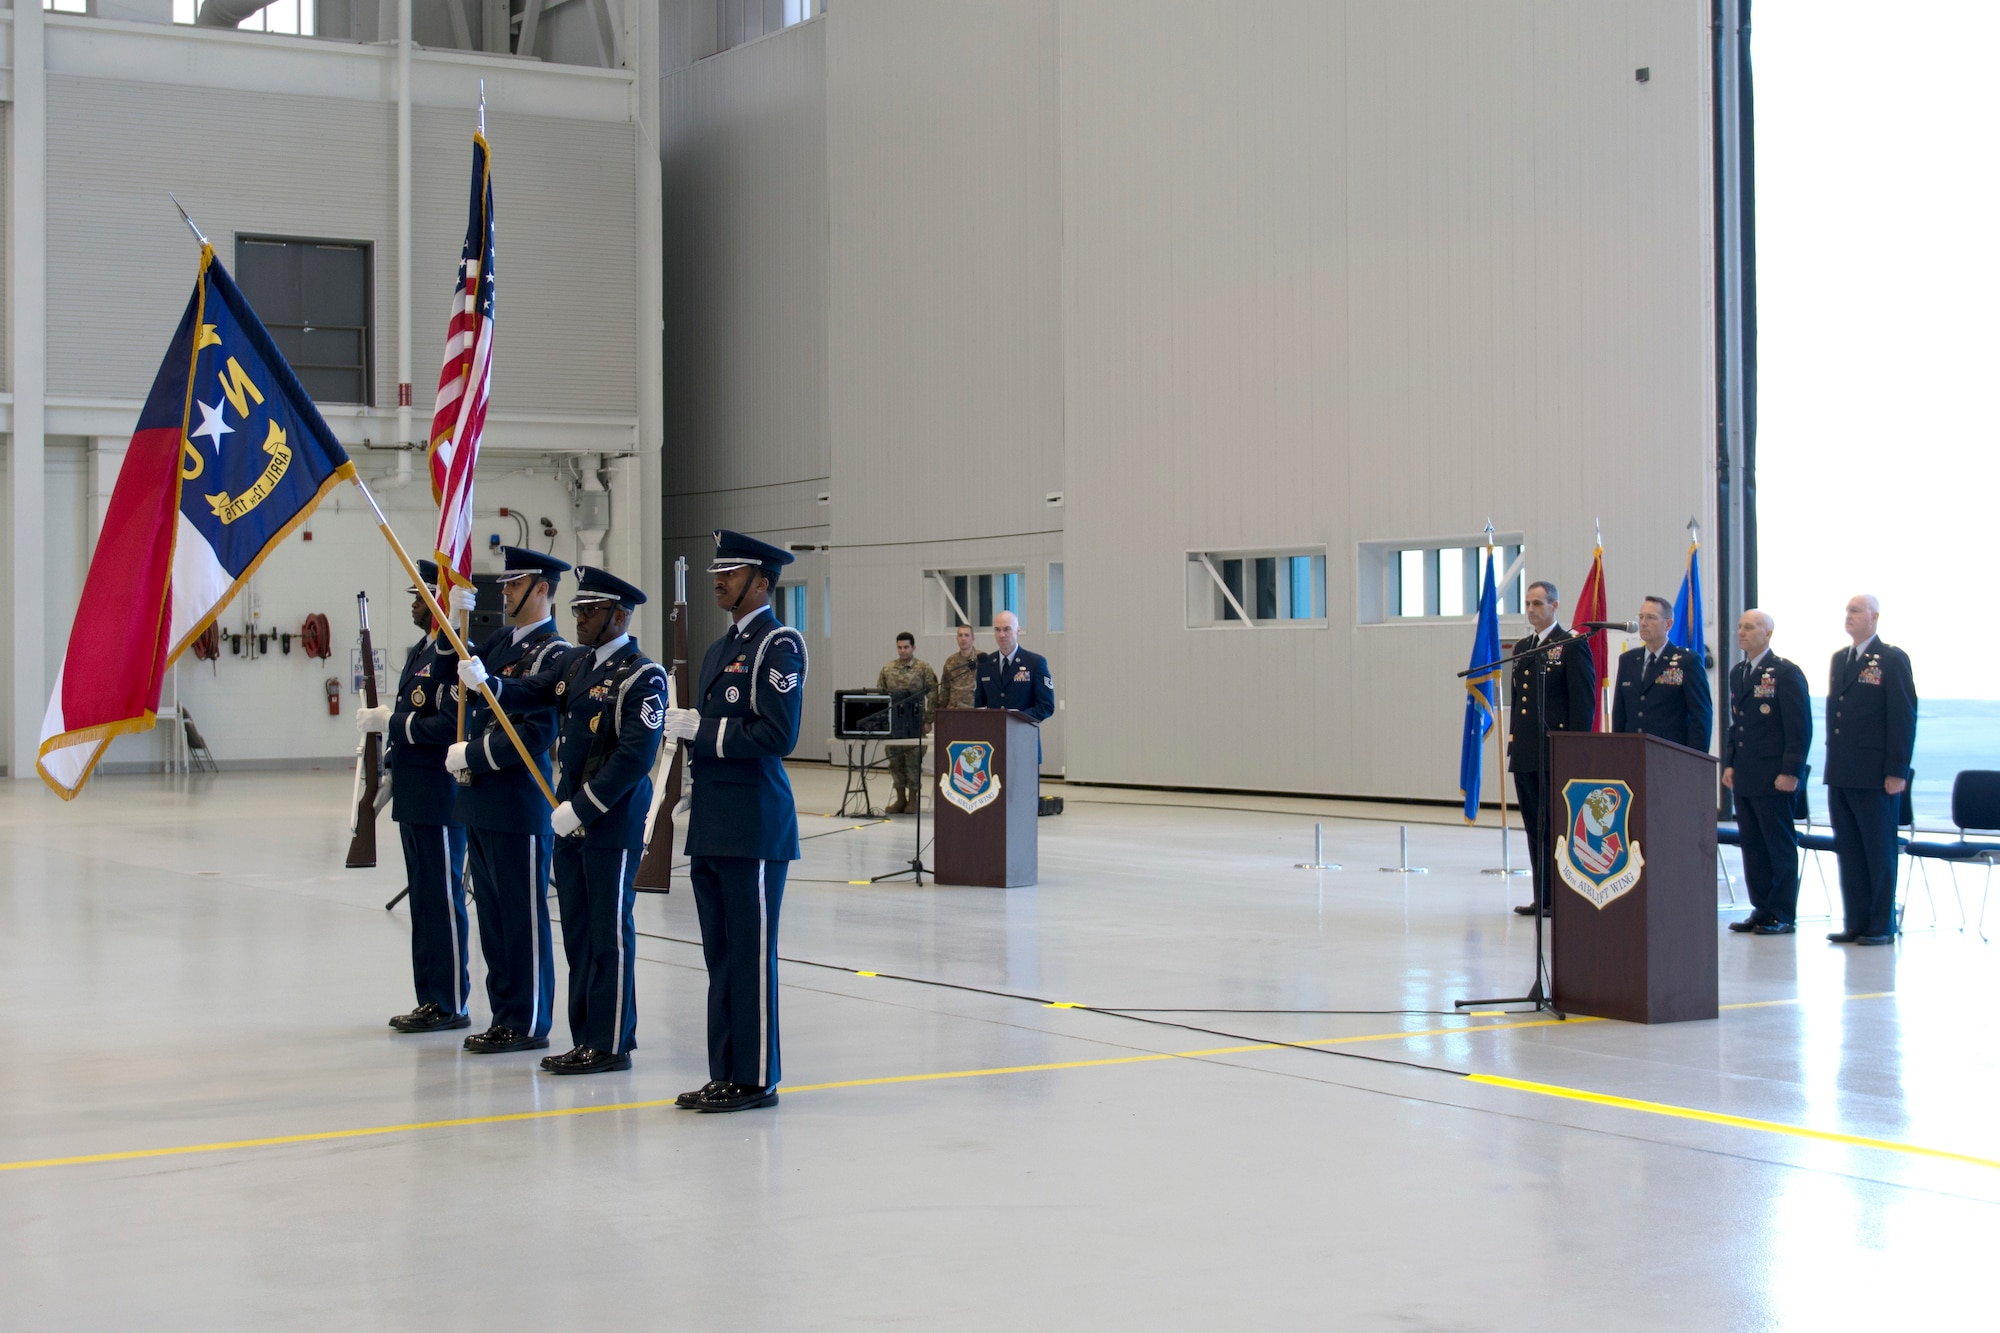 Members of the 145th Airlift Wing honor guard present arms during a ribbon-cutting ceremony held at the North Carolina Air National Guard Base.